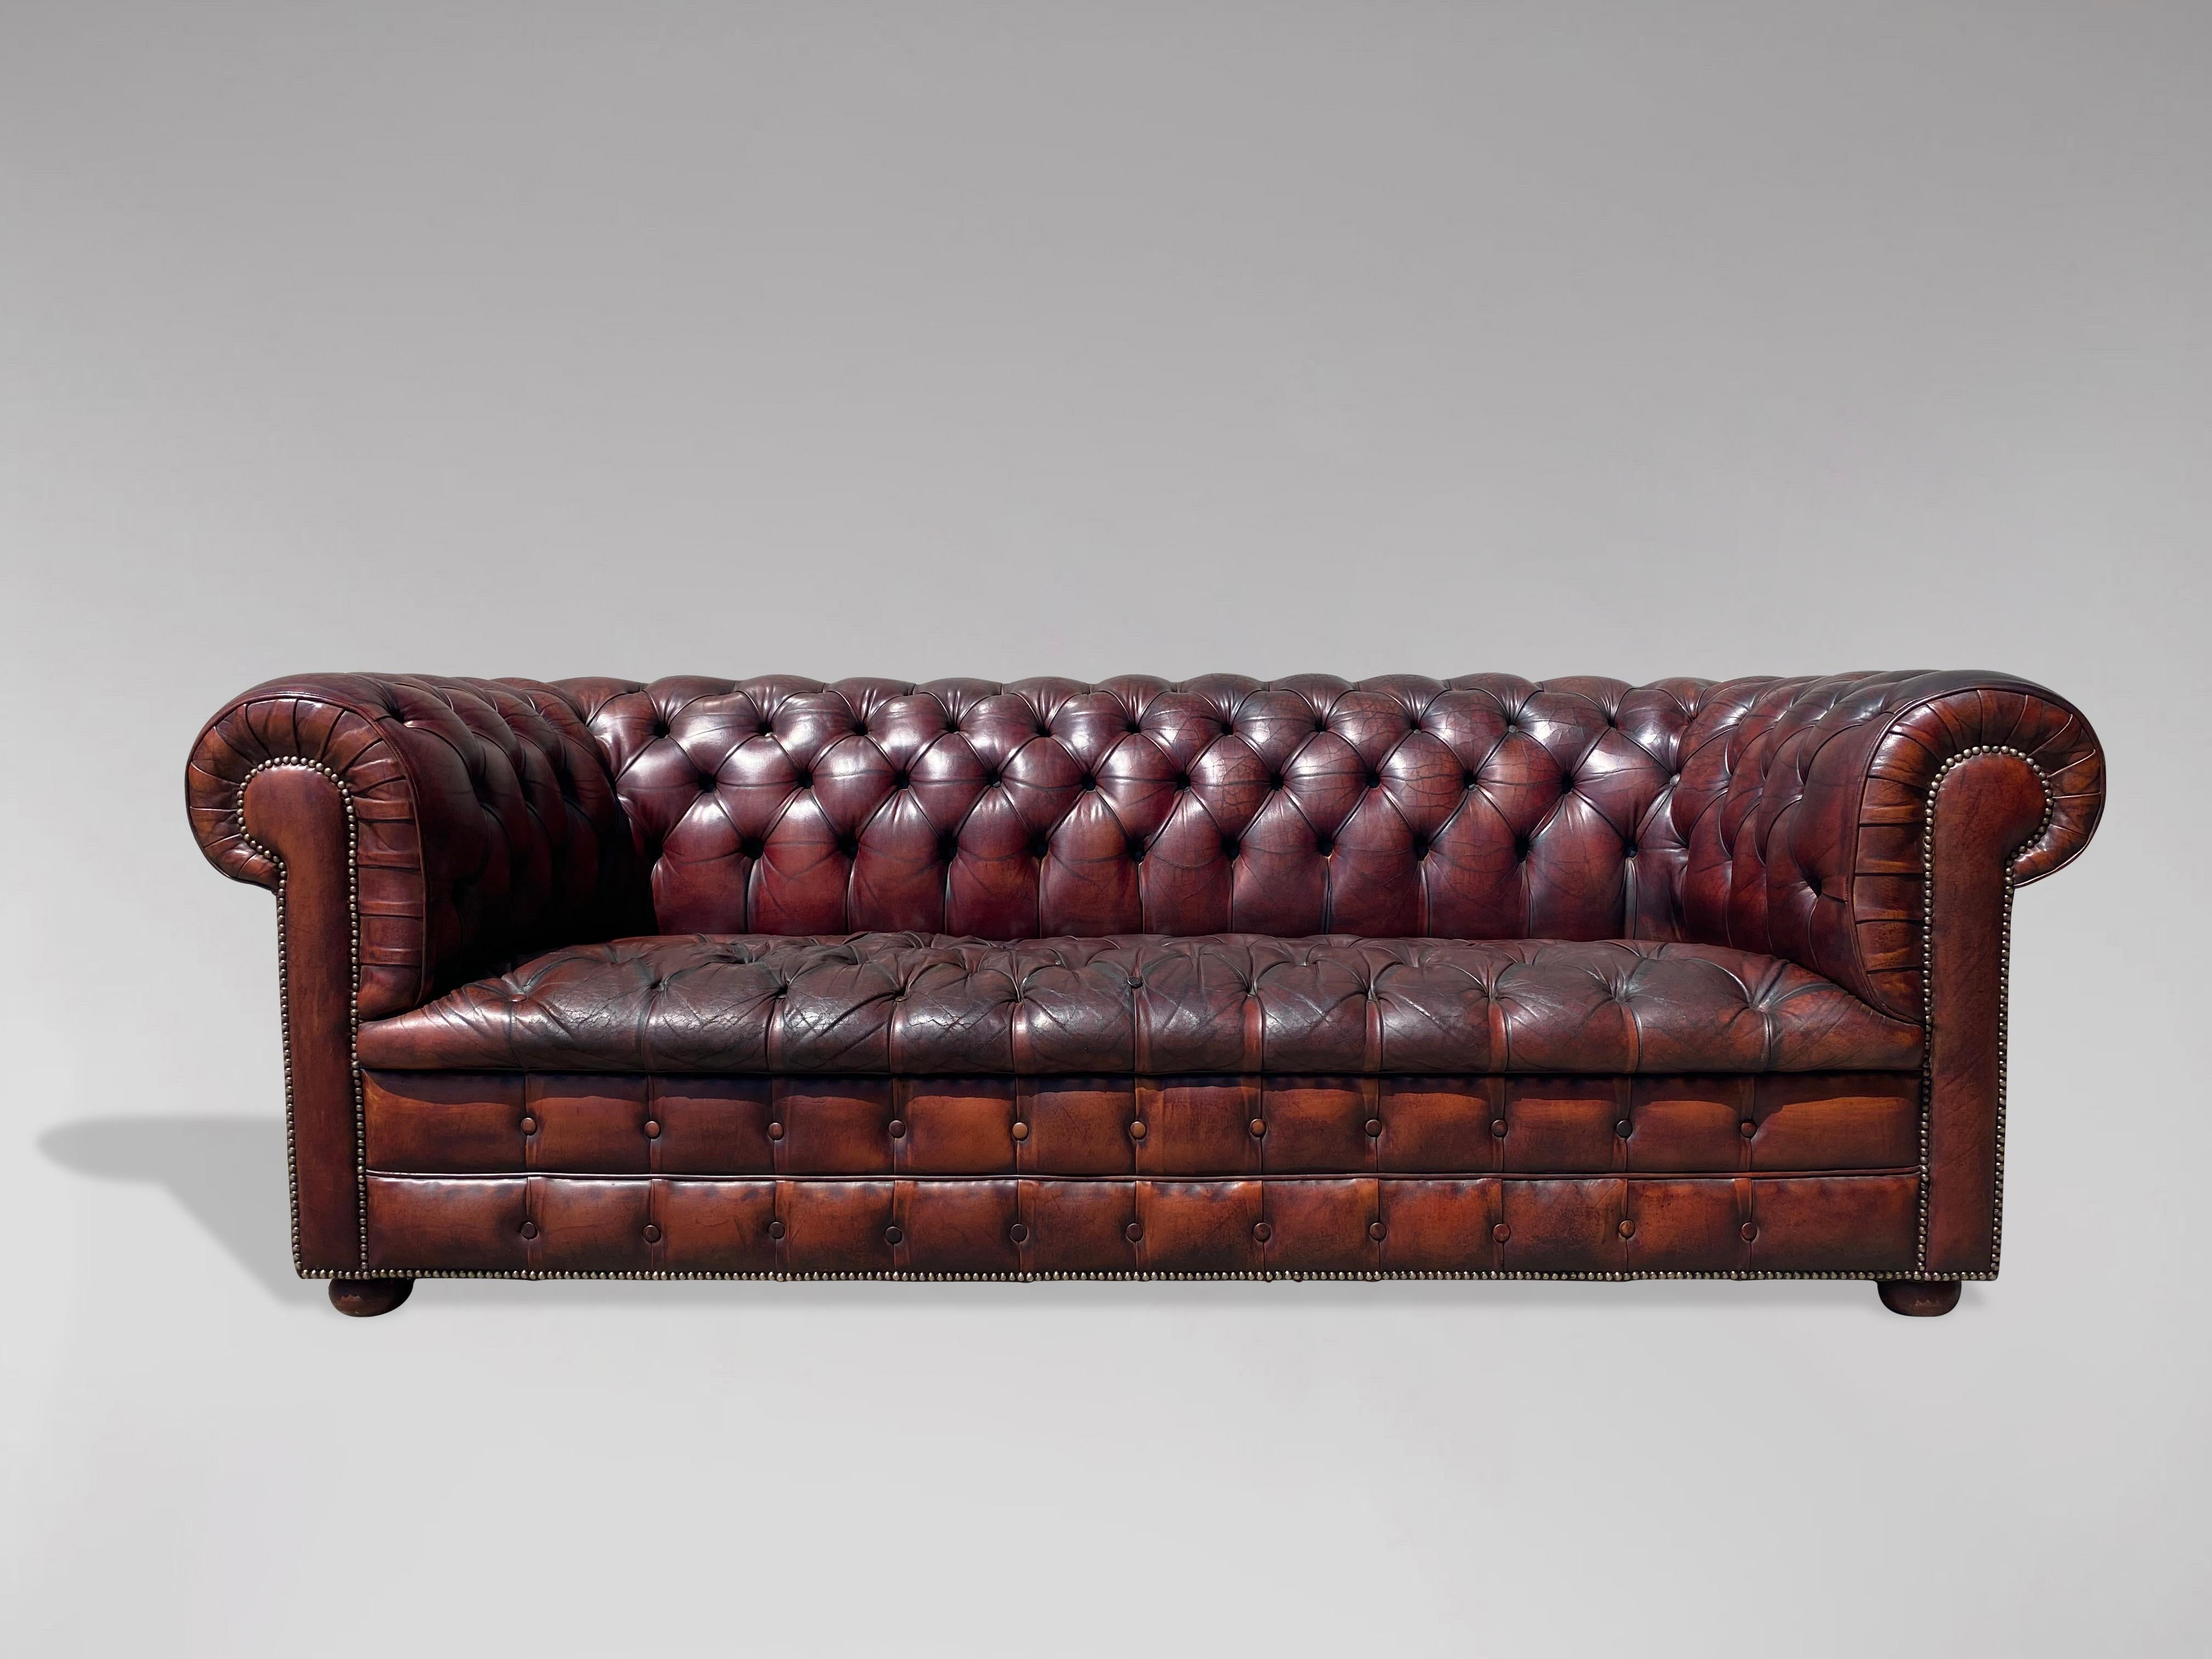 An early 20th century three seater leather button down burgundy colour chesterfield sofa. With the original red brown leather hide that has been cleaned and polished giving a lovely soft and sumptuous feel to the quality leather. It has a full